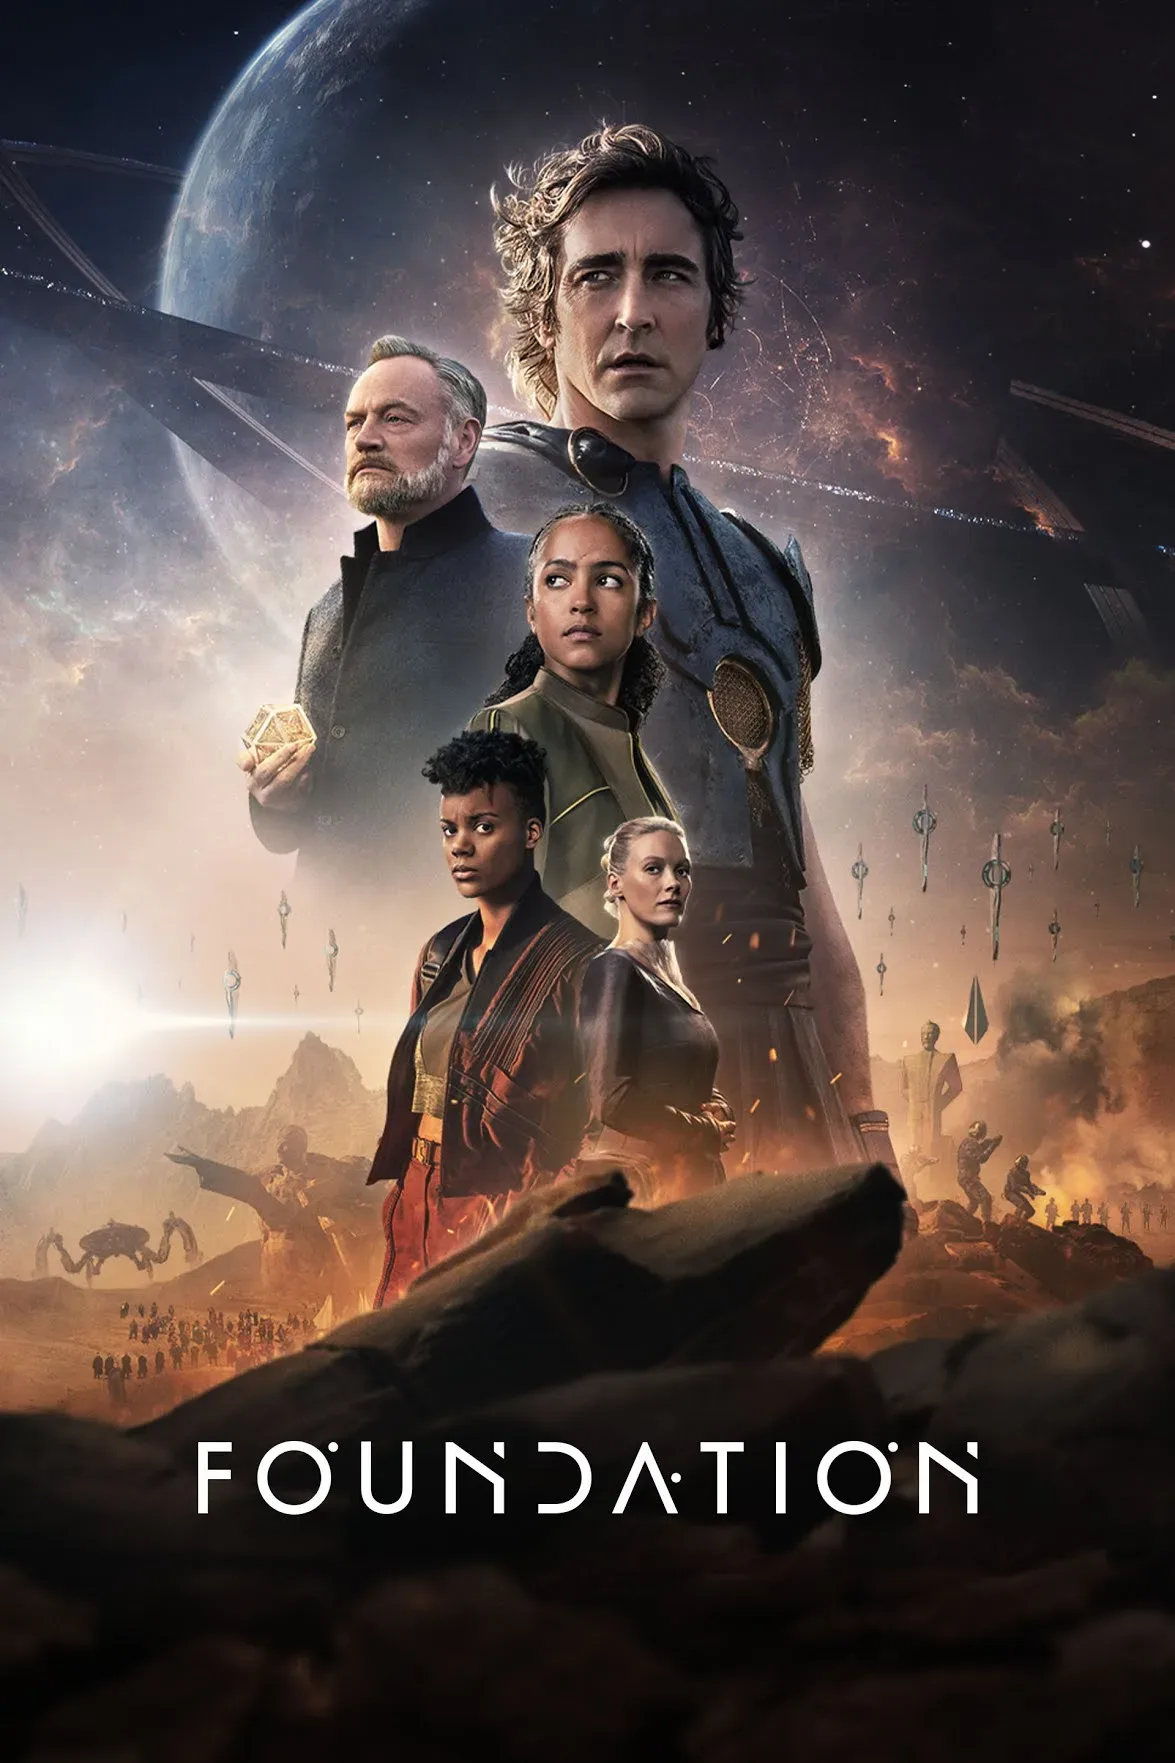 In the series, Foundation Season 2 - A complex saga of humans scattered on planets throughout the galaxy all living under the rule of the Galactic Empire. Dr Hari Seldon and his loyal followers attempt to preserve their culture as the galaxy collapses around them.